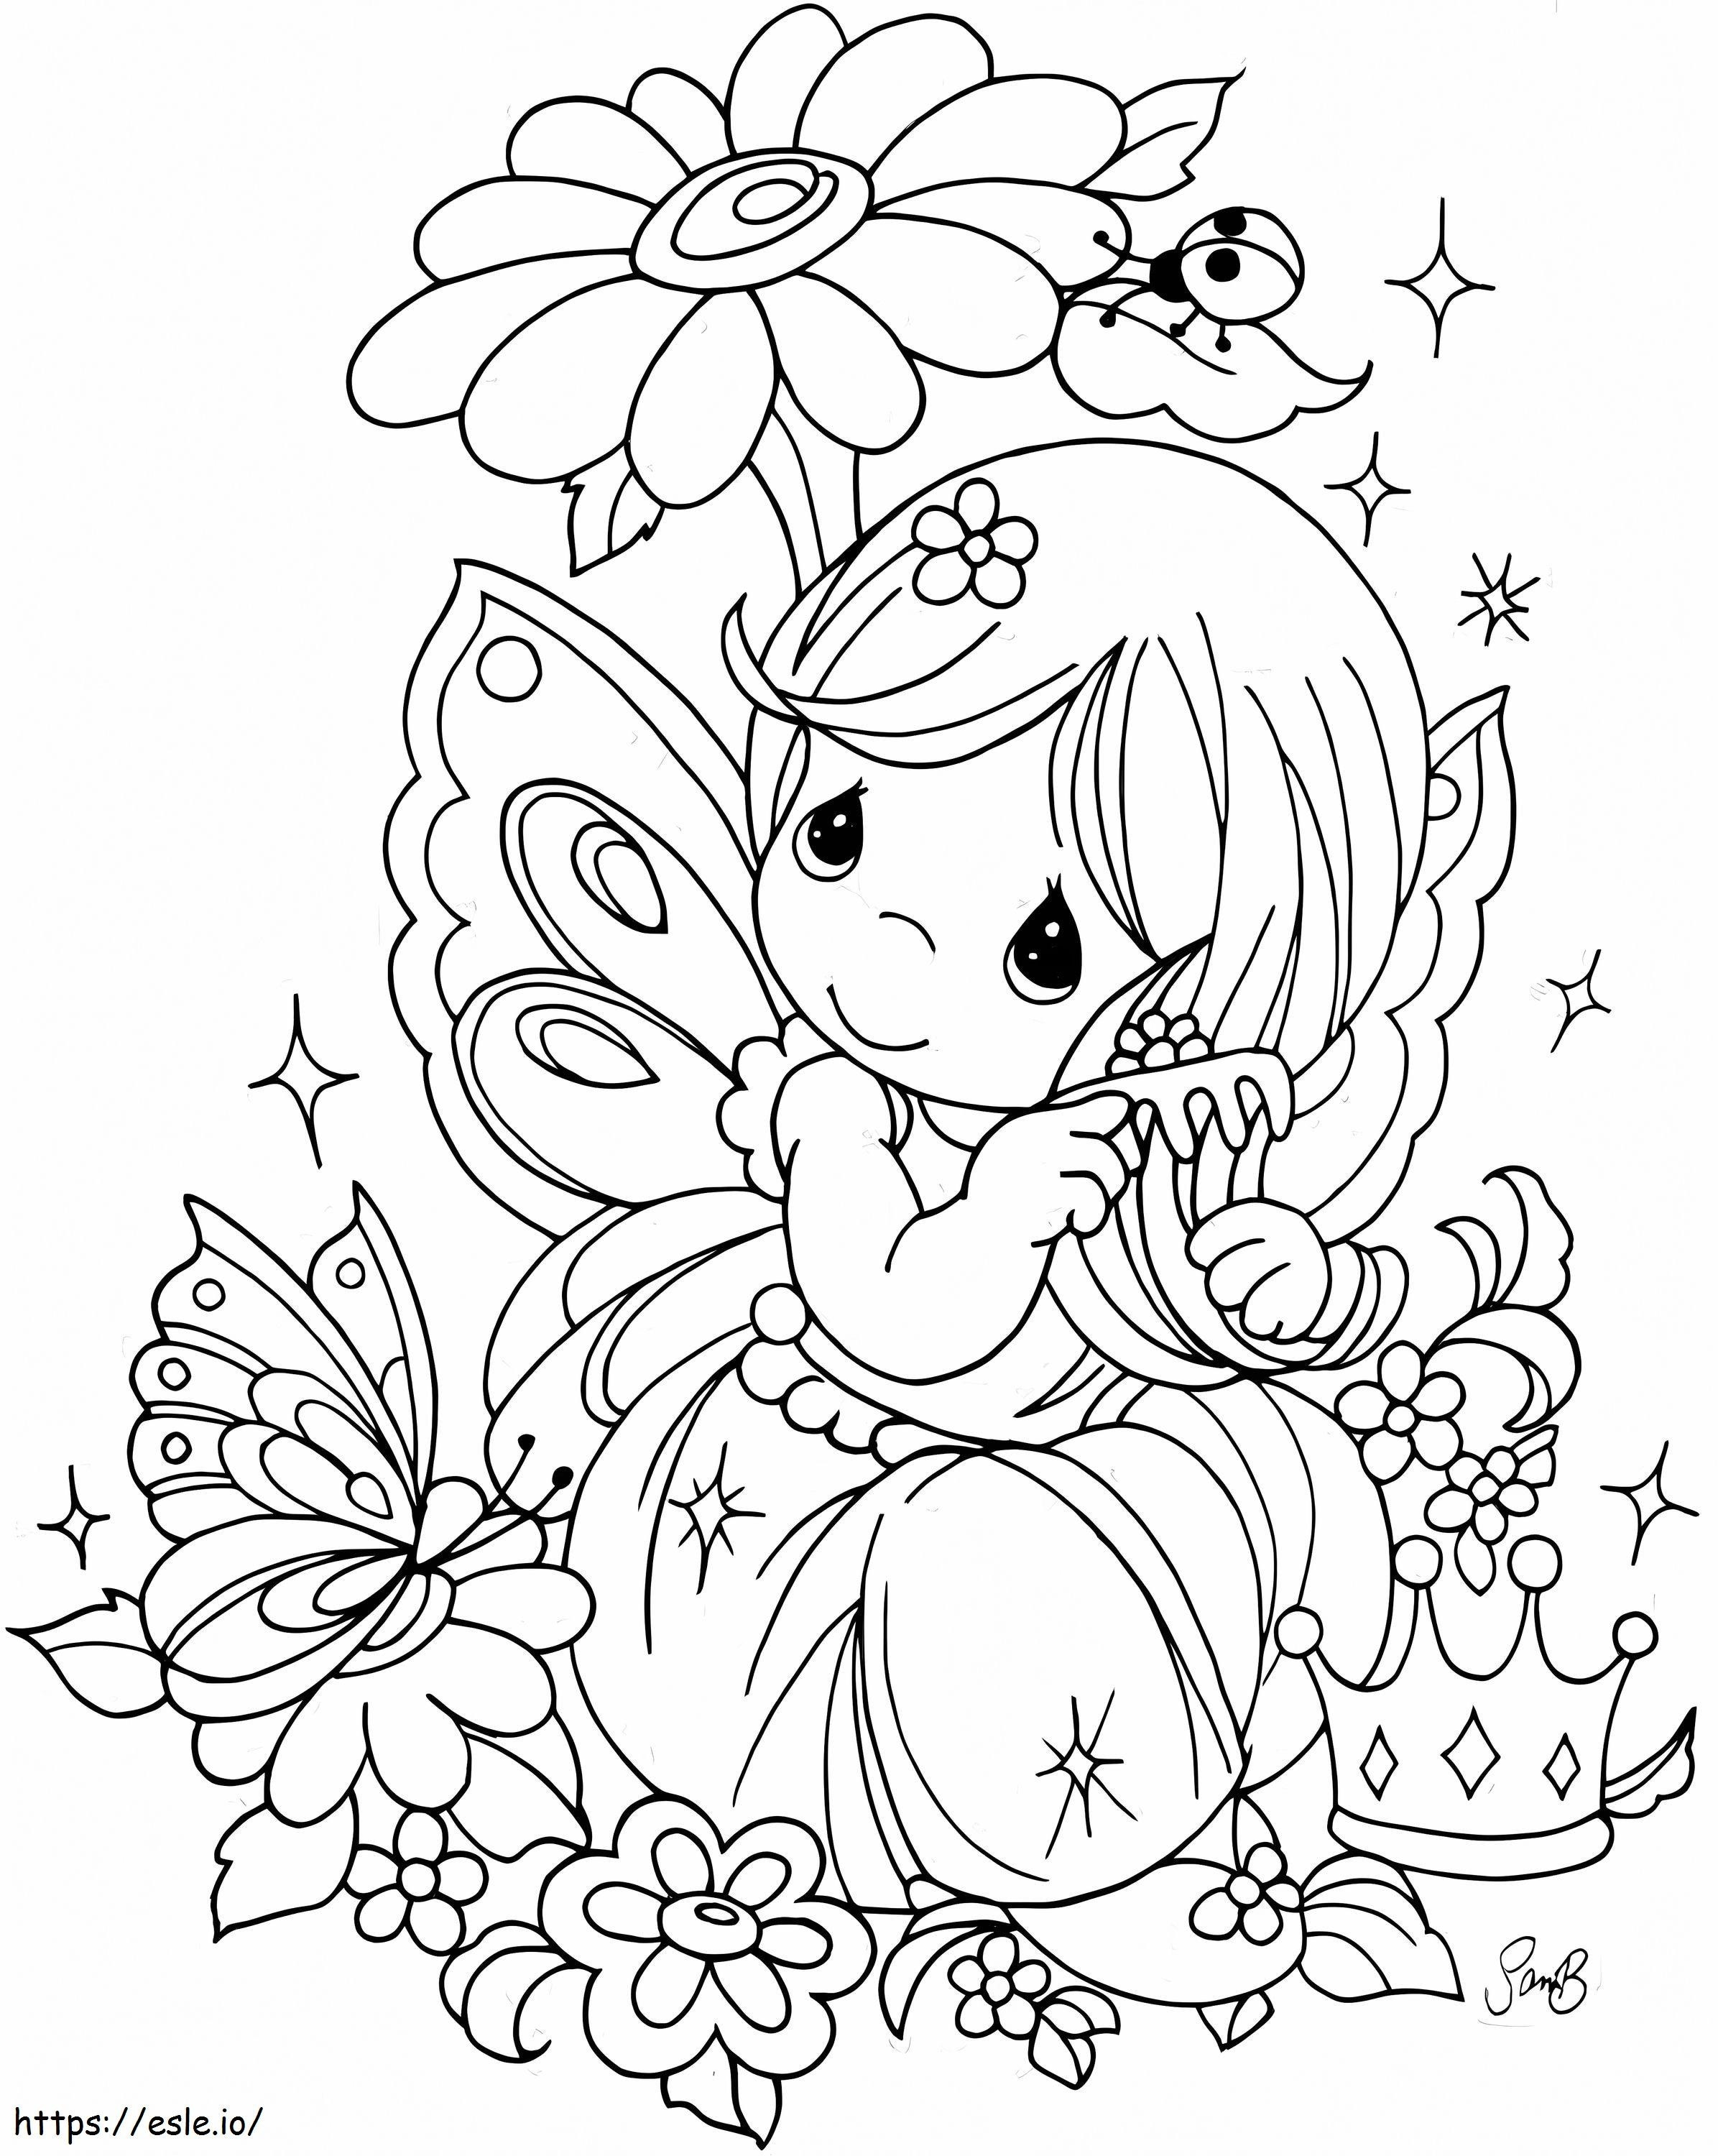 1570463659 Precious Moment Of Girl A4 coloring page